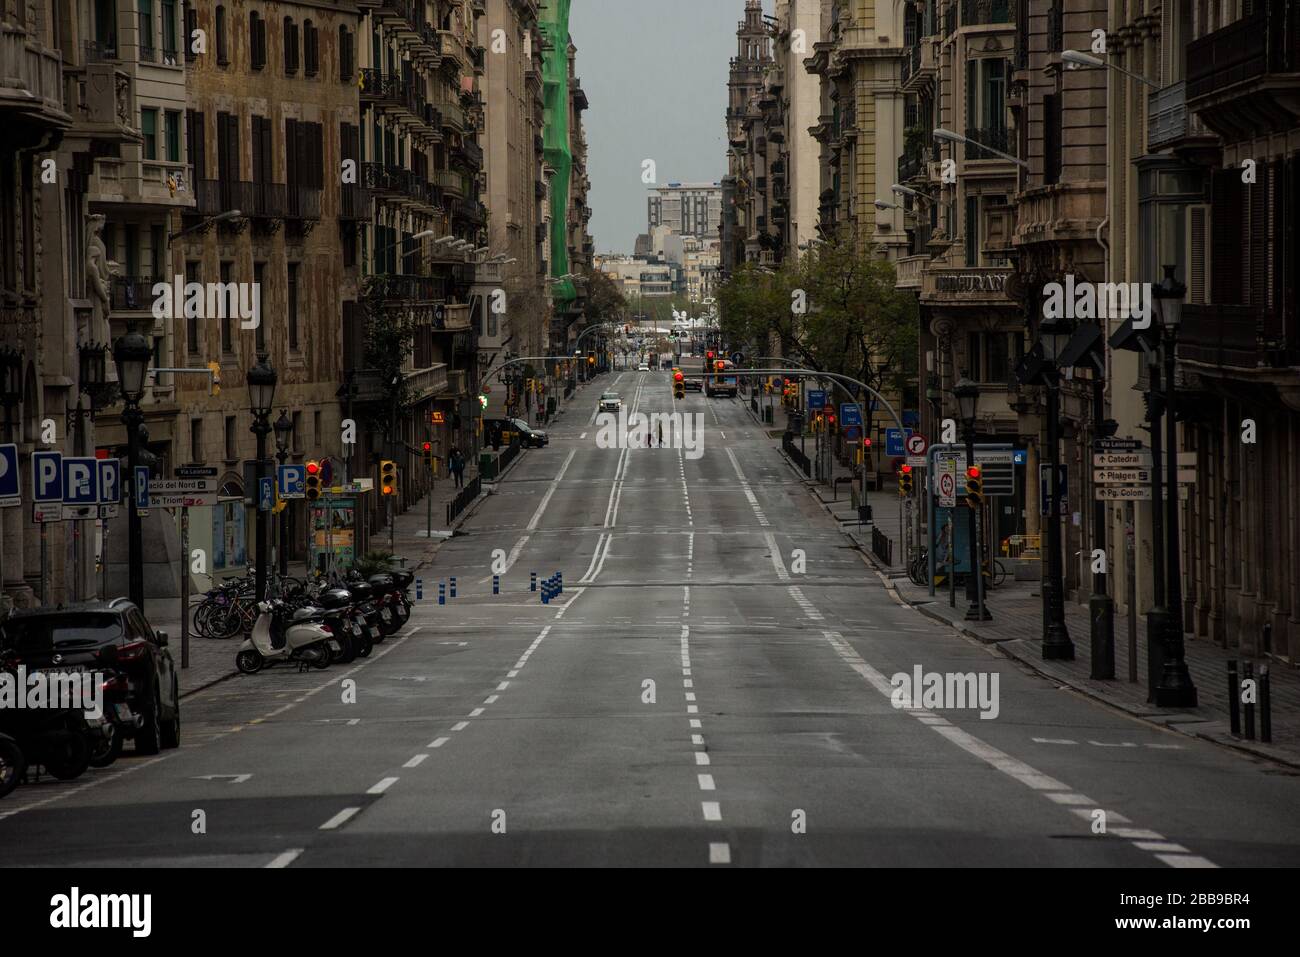 Barcelona, Catalonia, Spain. 30th March 2020. A woman crosses the empty Via Laietana street in Barcelona. Daily coronavirus deaths fall slightly with 812 Covid-19 victims in the last 24 hours in Spain, Spanish government has ordered new lockdown restrictions. Credit:Jordi Boixareu/Alamy Live News Stock Photo